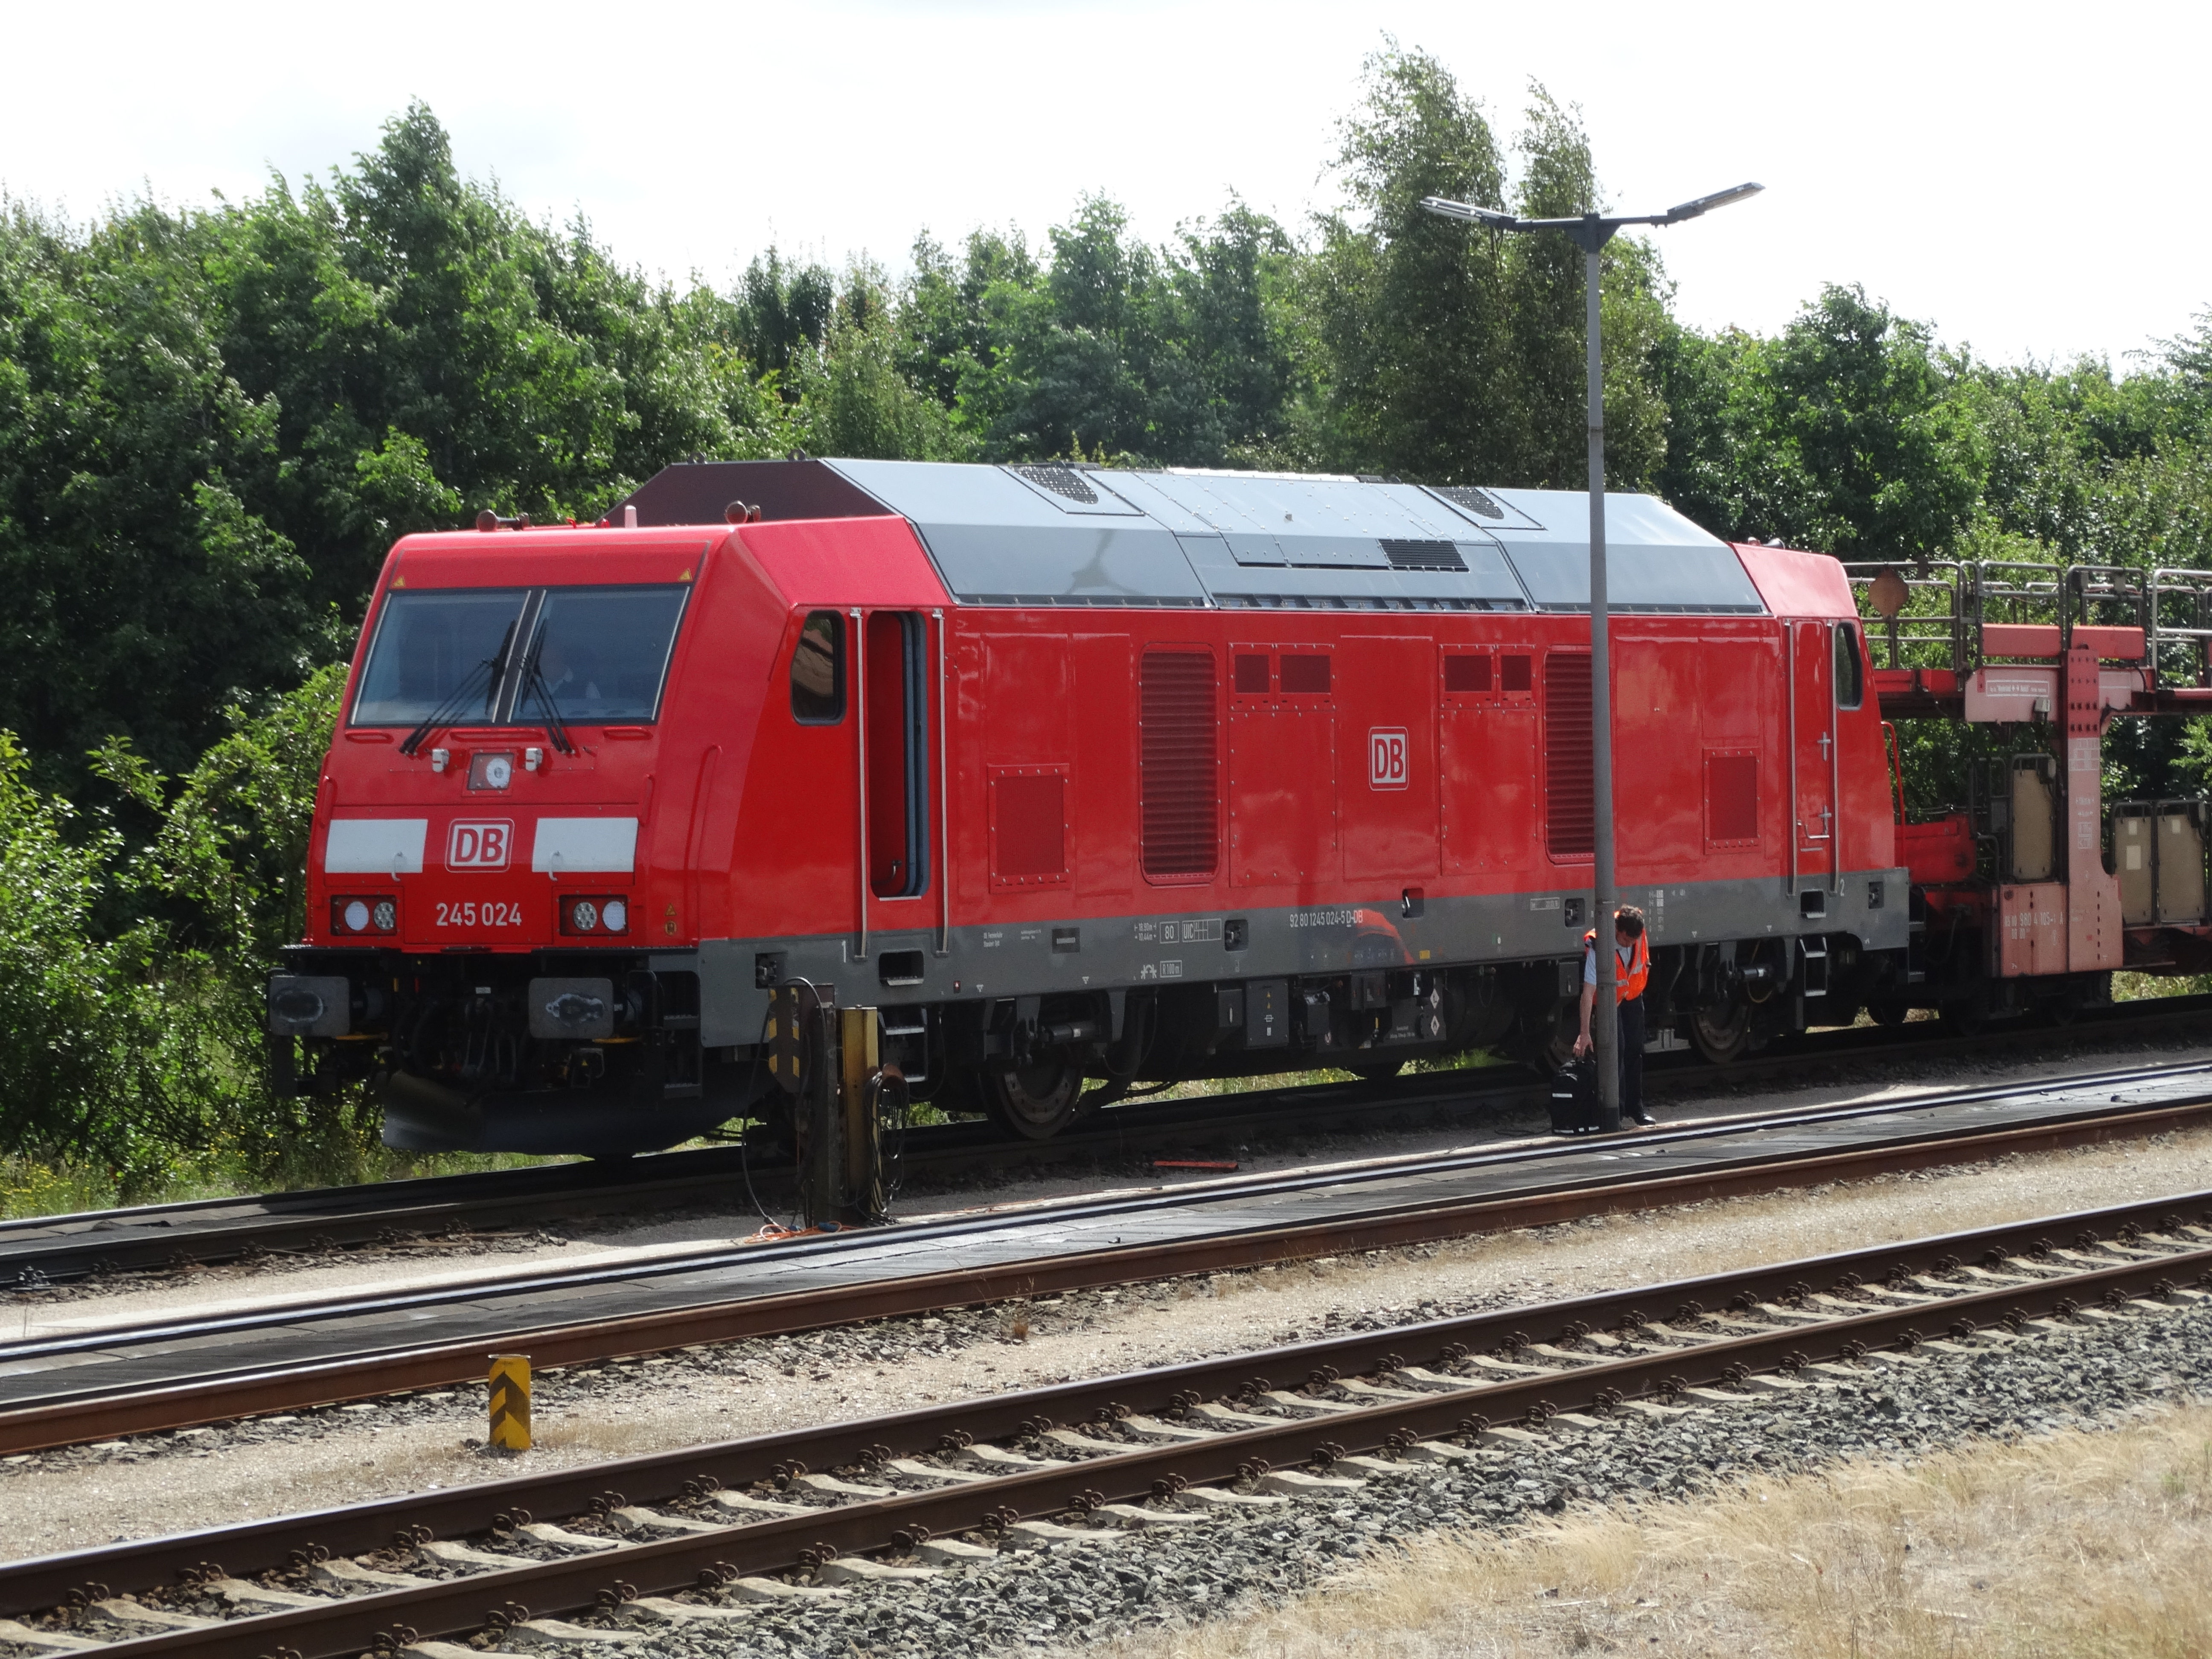 FUNET Railway Photography Archive: Diesel locomotives of DB AG and DB Cargo